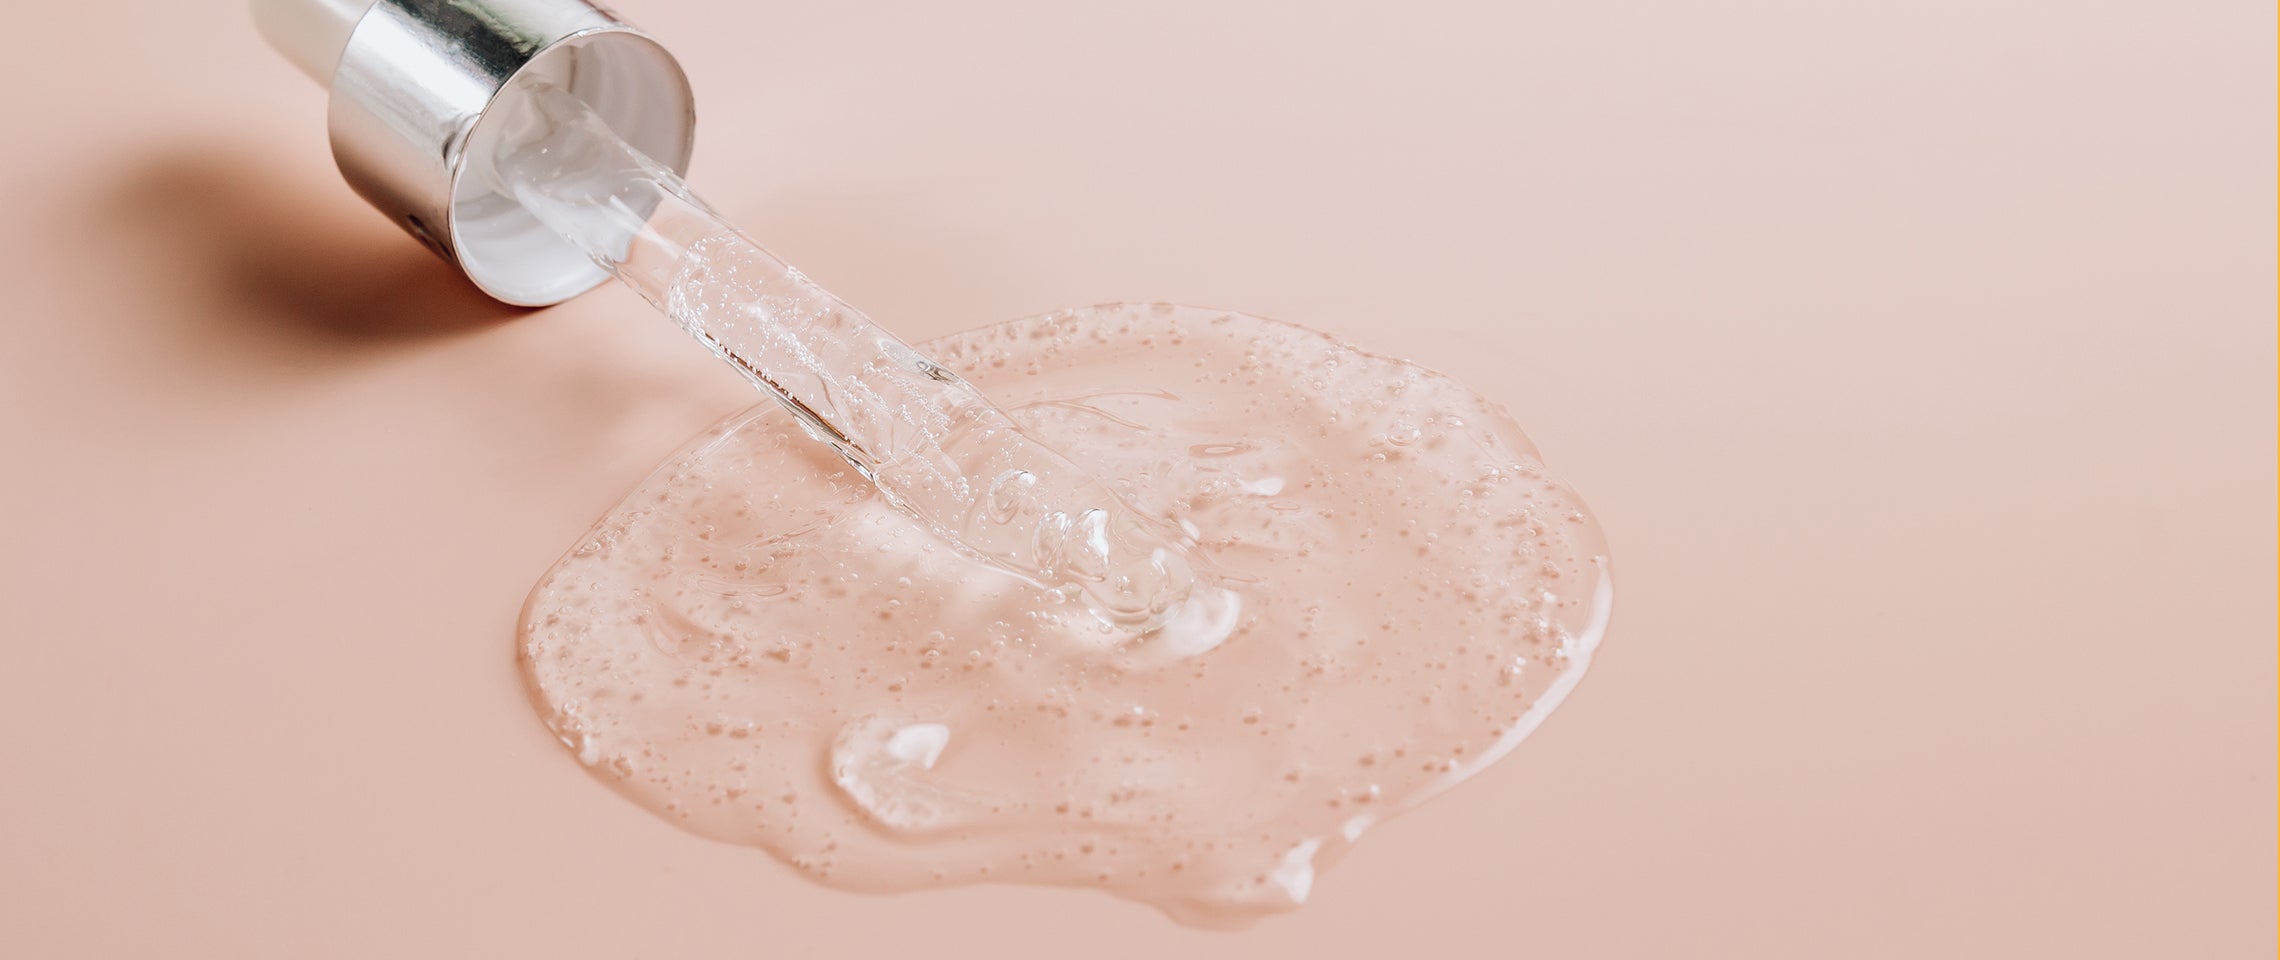 Hydrate and Rejuvenate: 7 Amazing Beauty Benefits of Hyaluronic Acid in Skincare